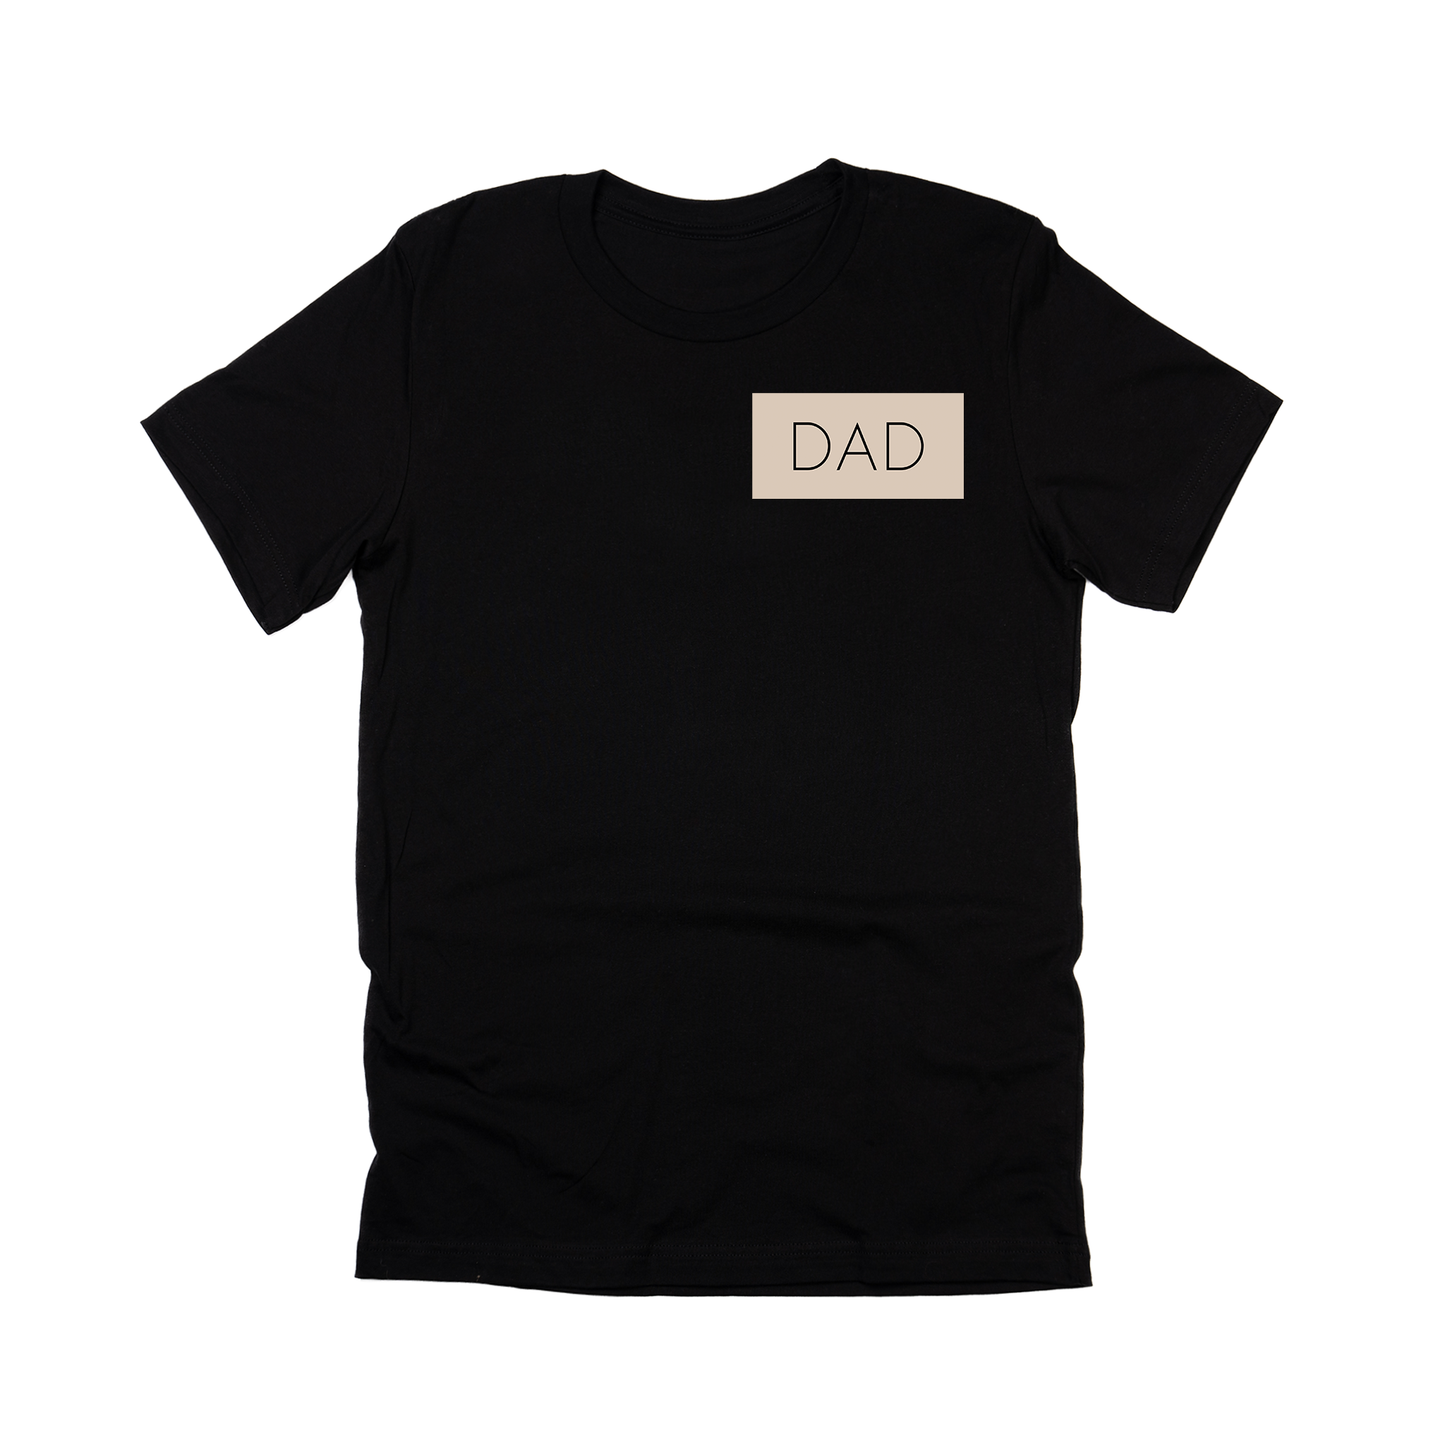 Dad (Boxed Collection, Pocket, Stone Box/Black Text) - Tee (Black)